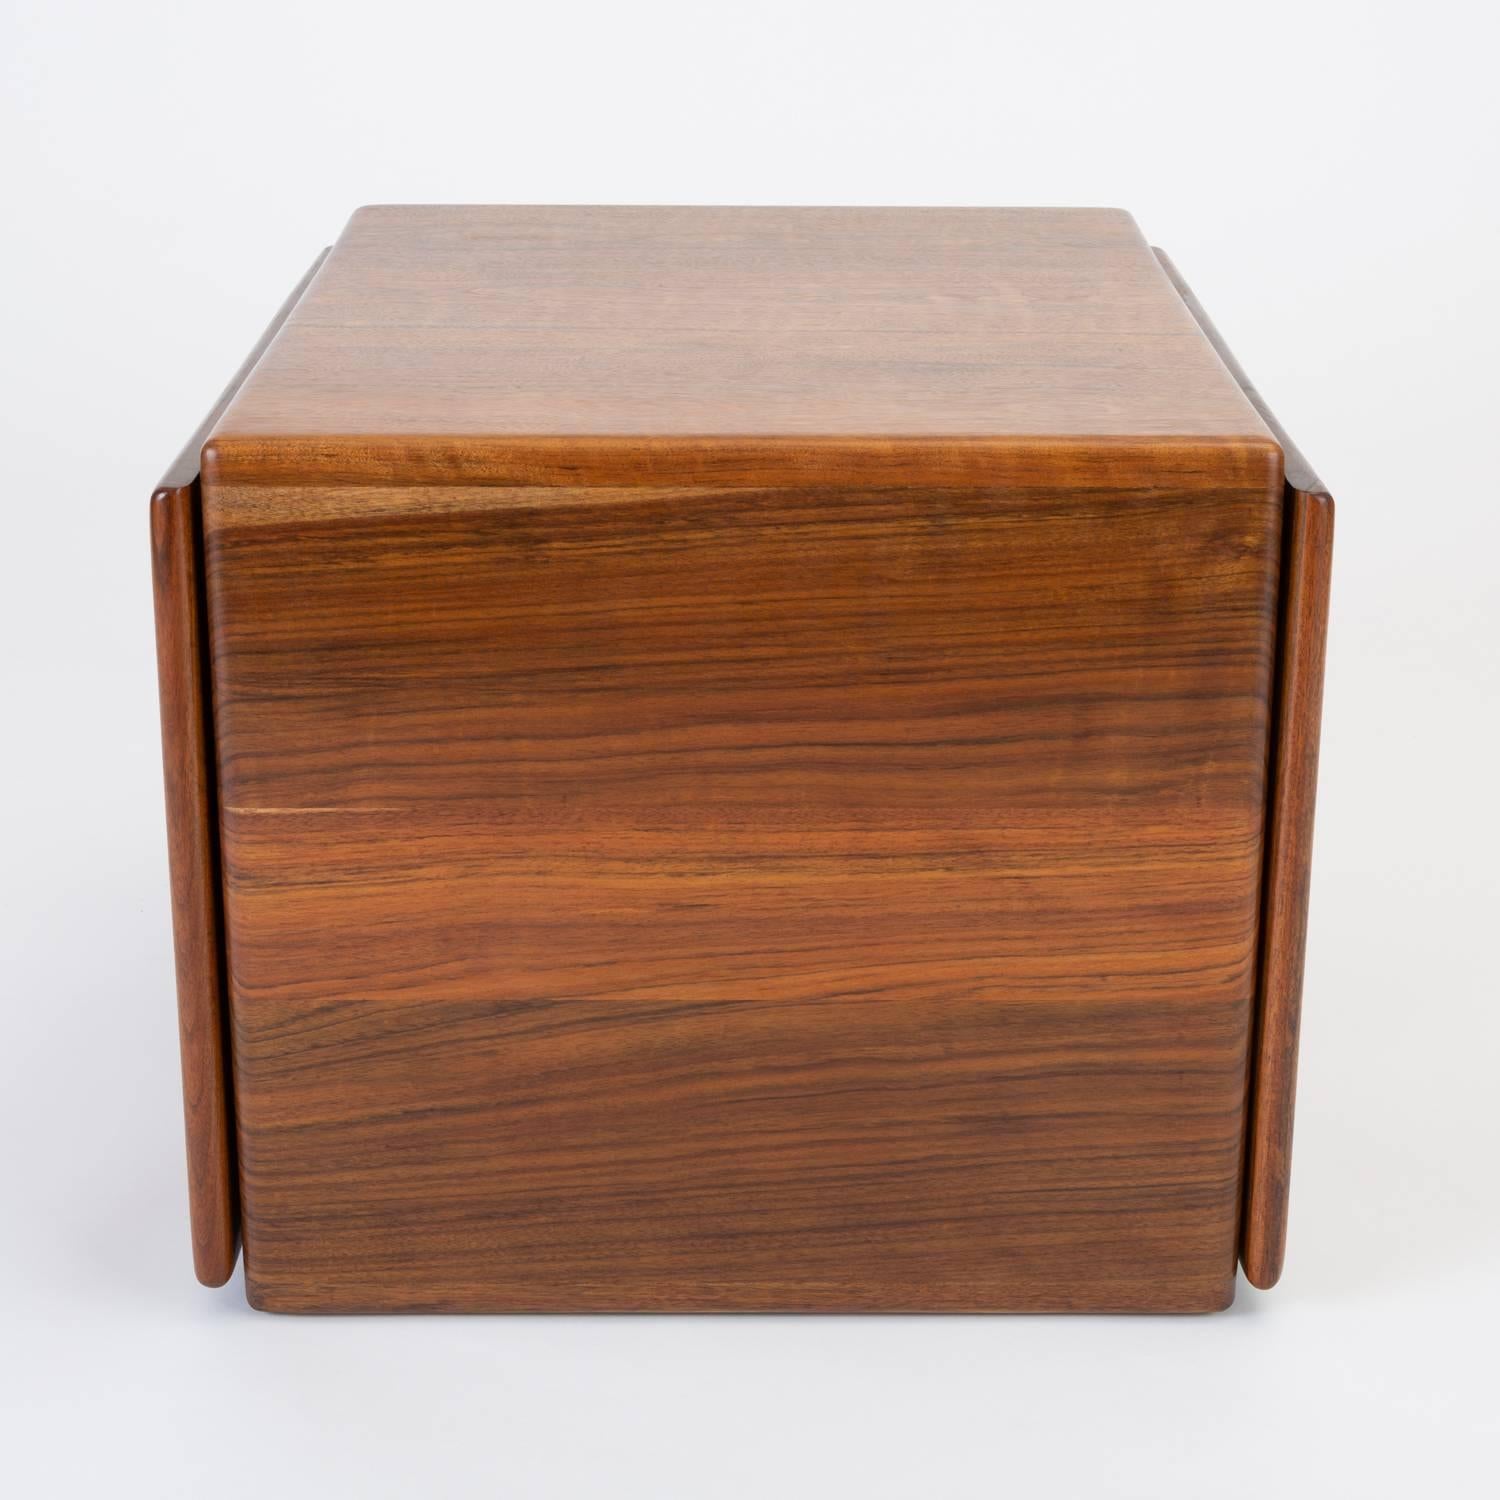 Softwood Cube Side Table or Storage Chest in Rare African Shedua Wood by Gerald McCabe